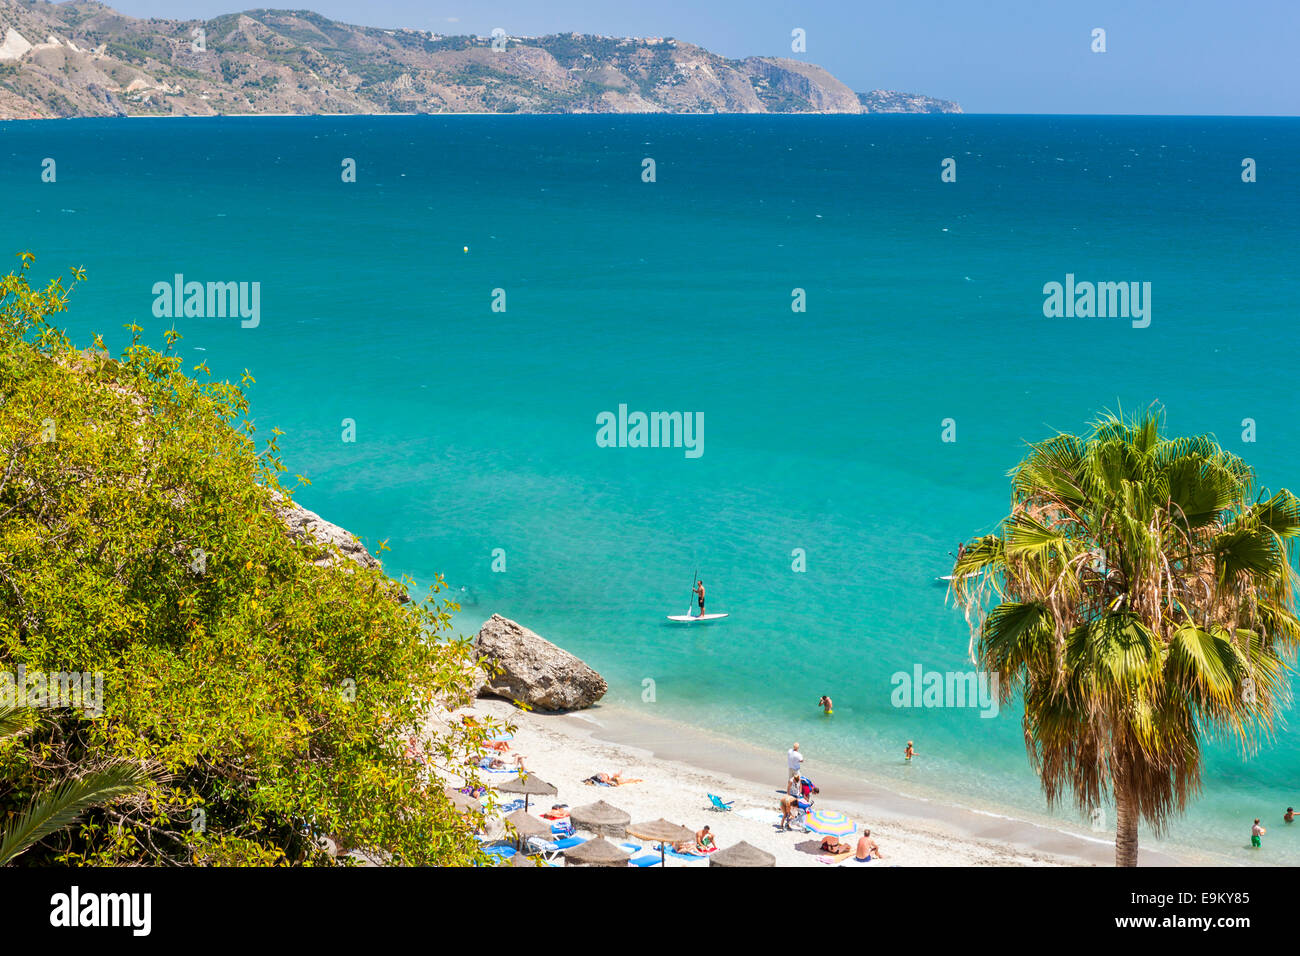 View of Playa Calahonda from the Balcon de Europa (Balcony of Europe), Nerja, Costa del Sol, Malaga province, Andalusia, Spain, Stock Photo